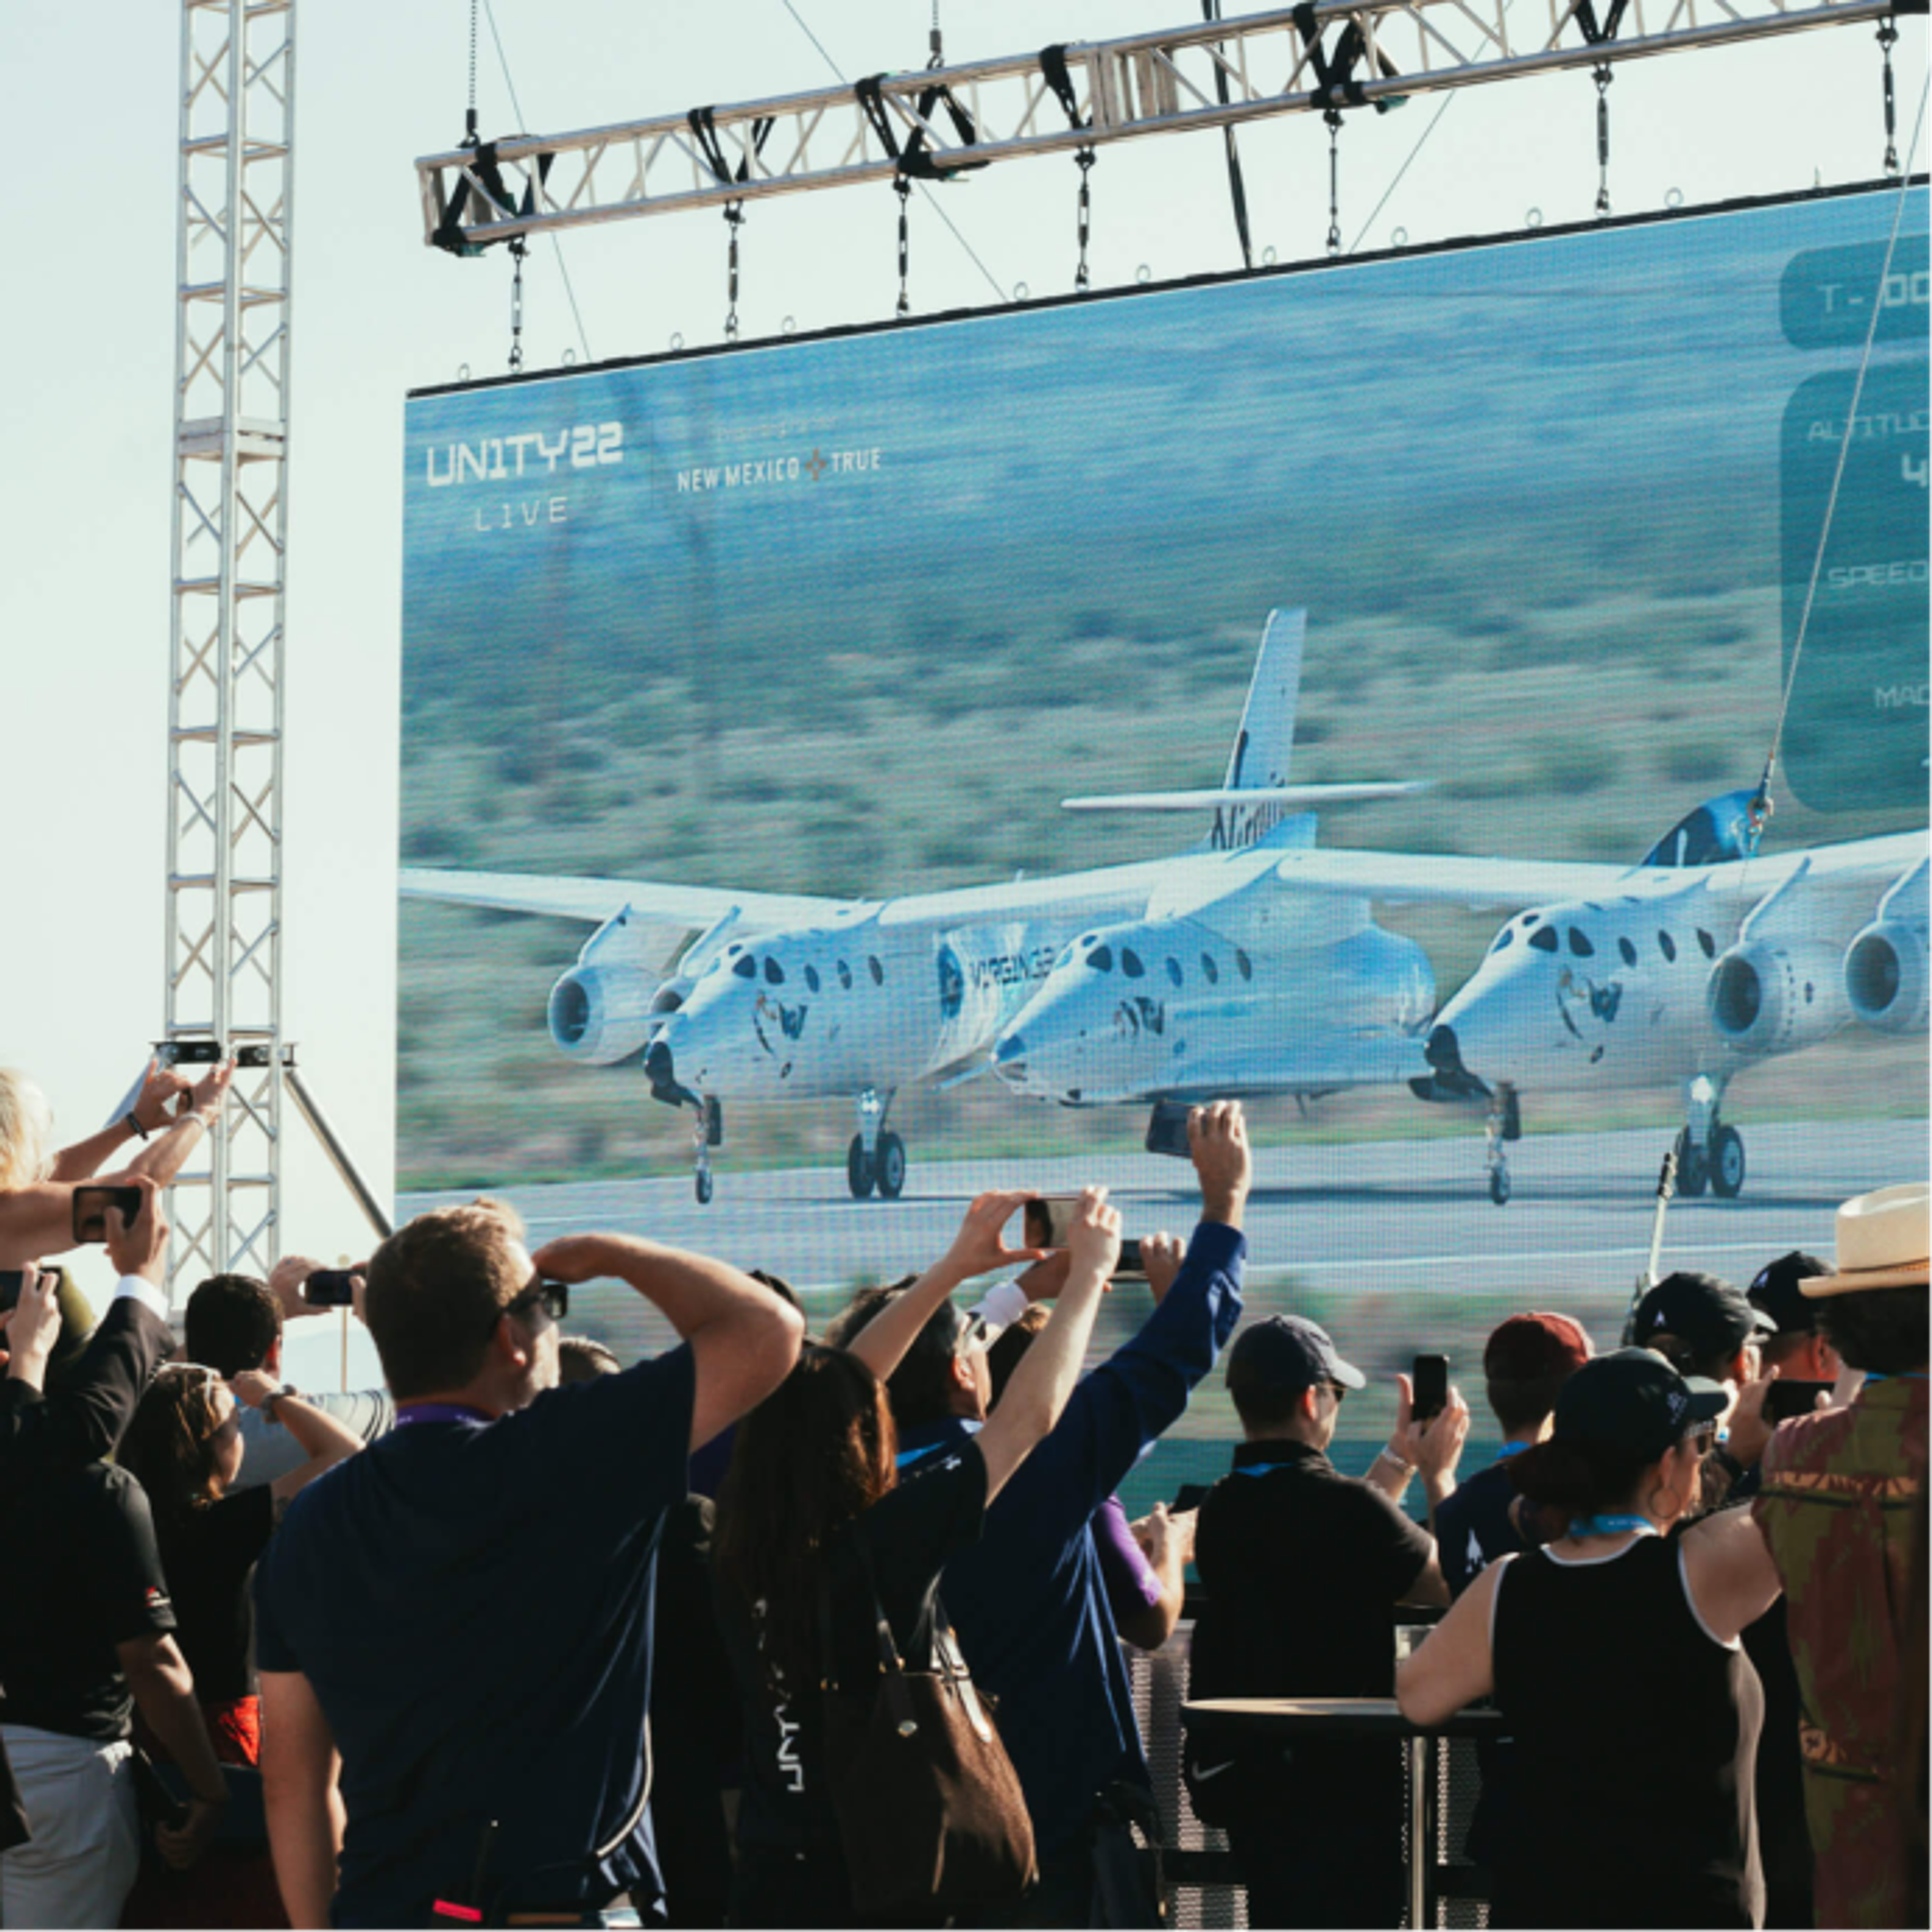 Virgin Galactic Launch is broadcast on a large LED screen, a crowd is in the foreground watching the broadcast